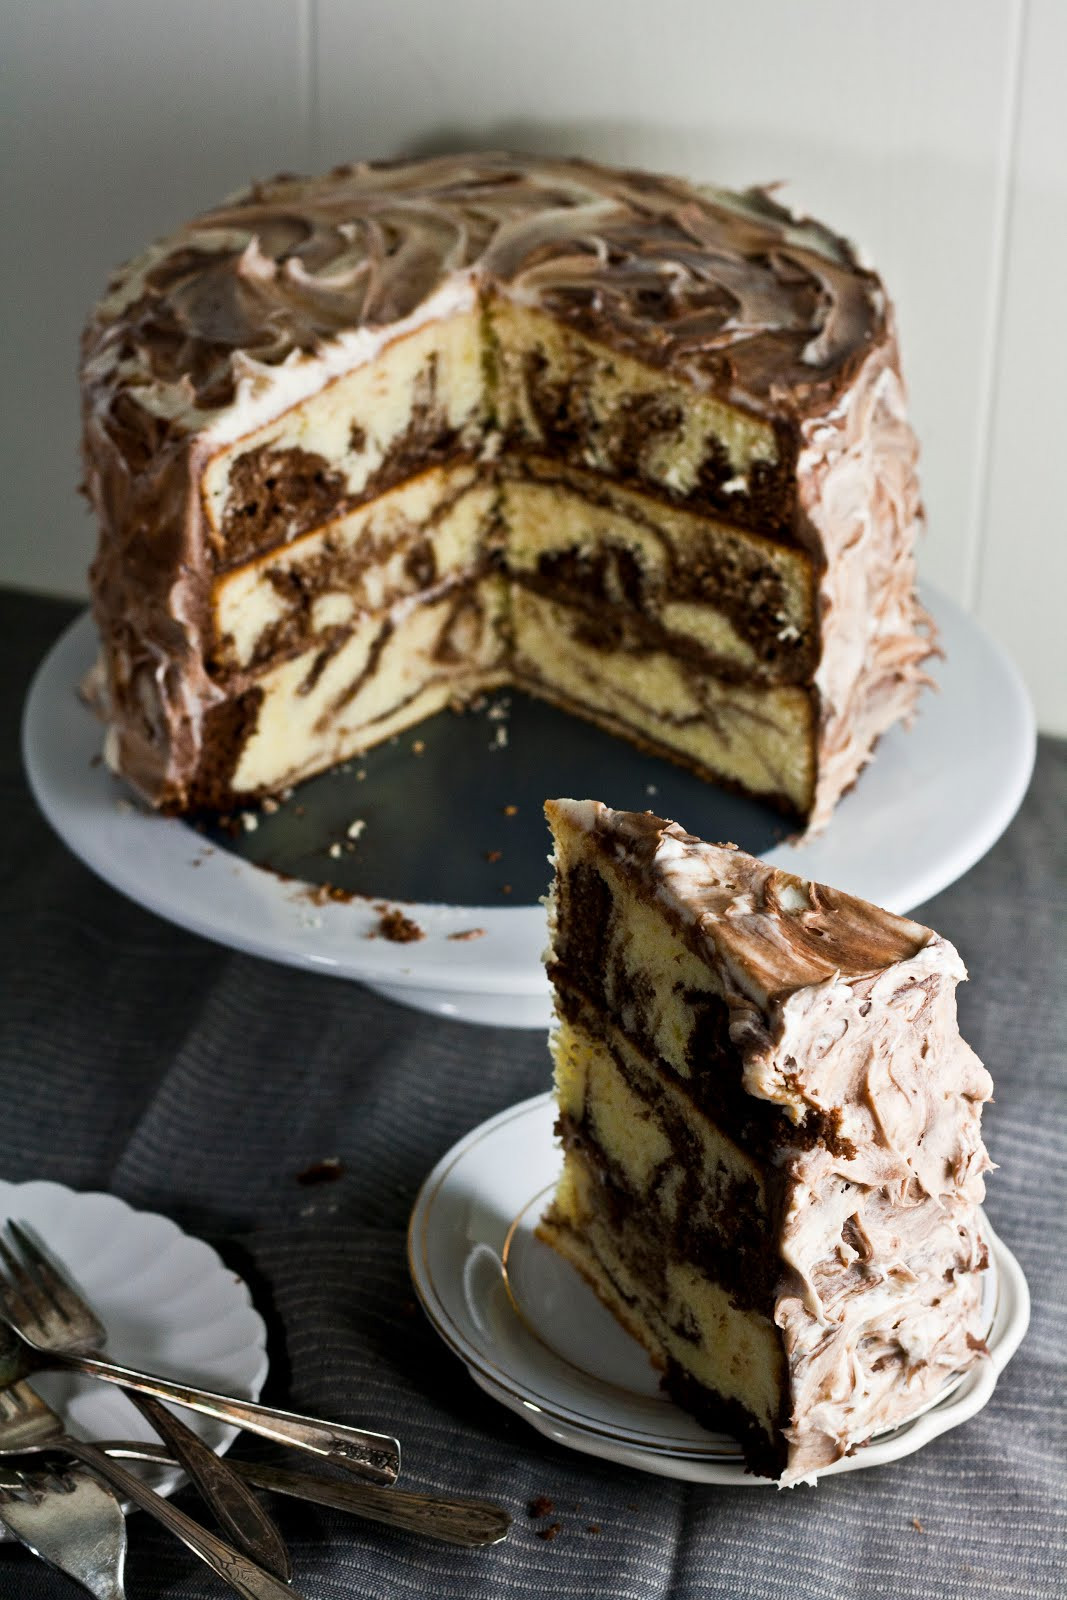 Bakery Cake Recipes
 The Brown Betty Bakery s Marble Pound Cake